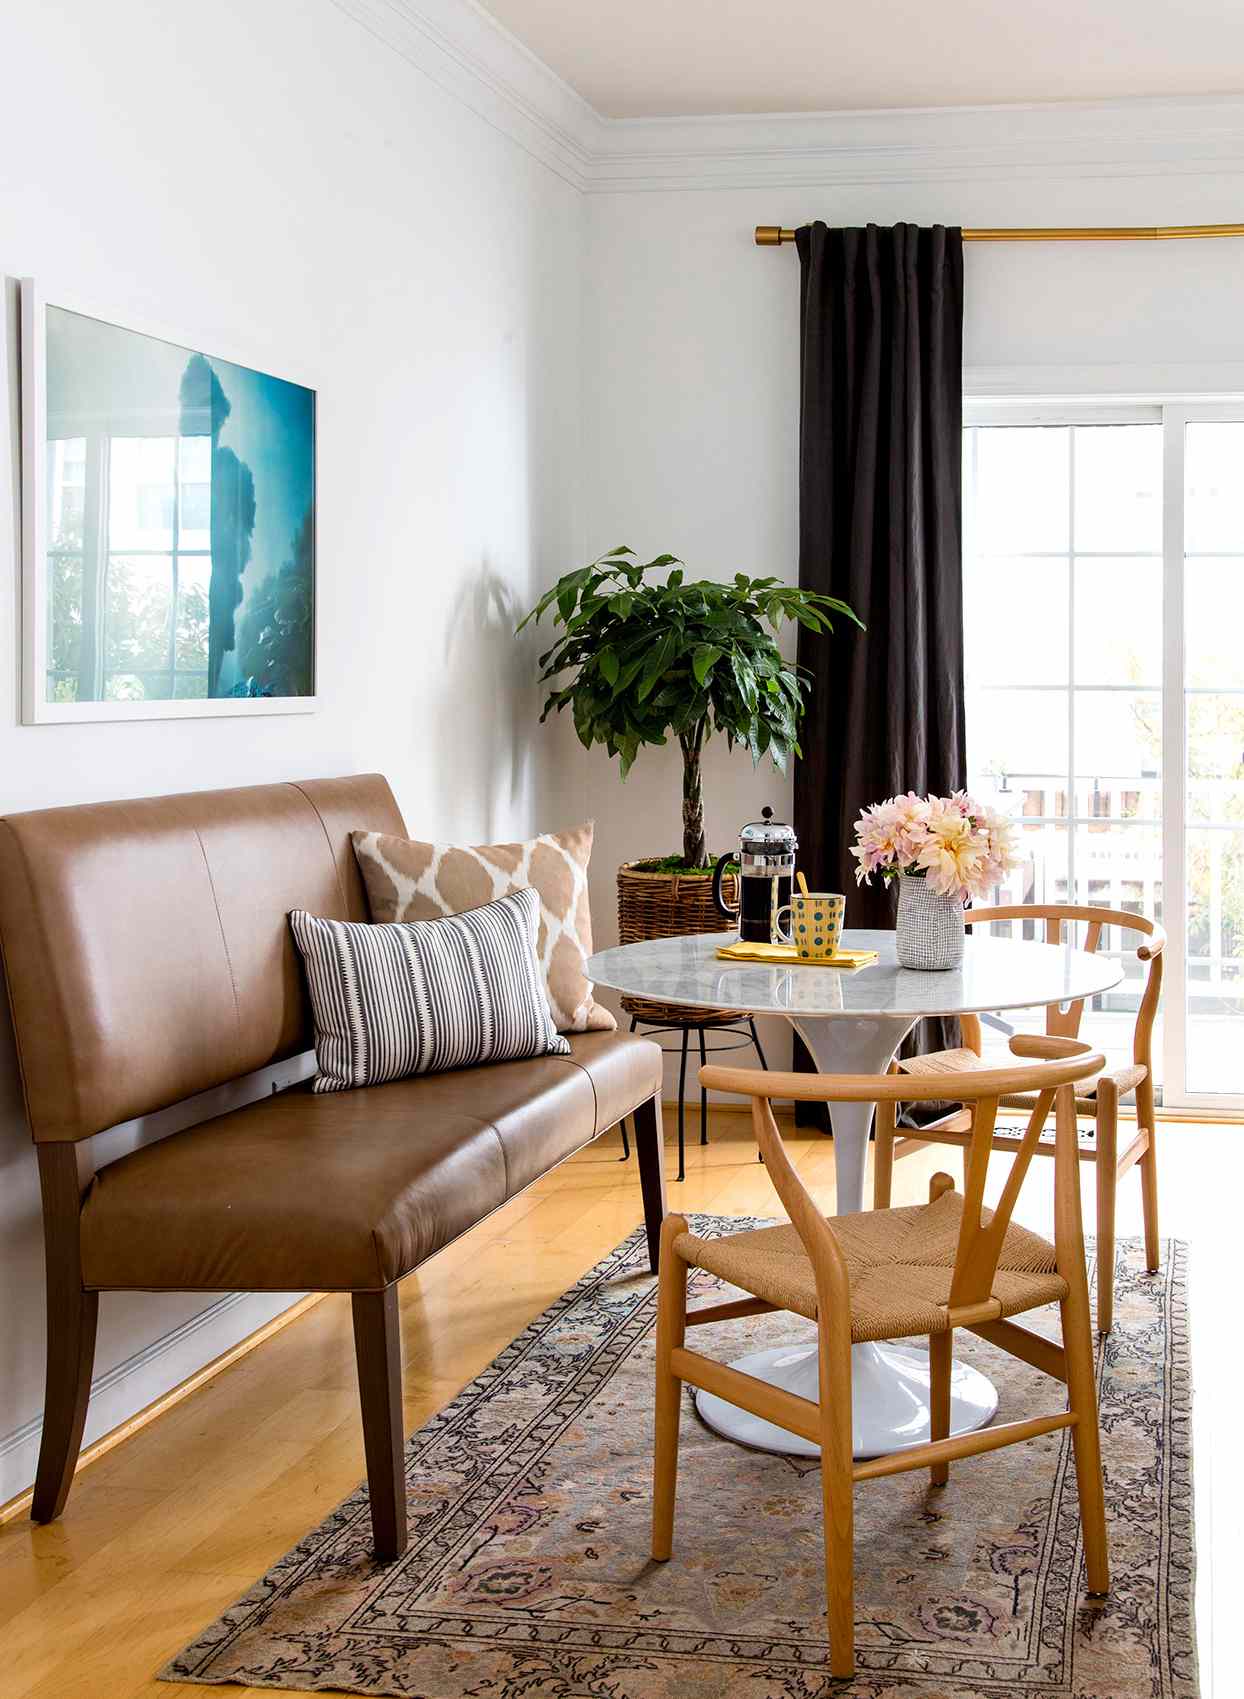 15 Small Dining Room Ideas To Make The, Dining Room Sets Small Spaces